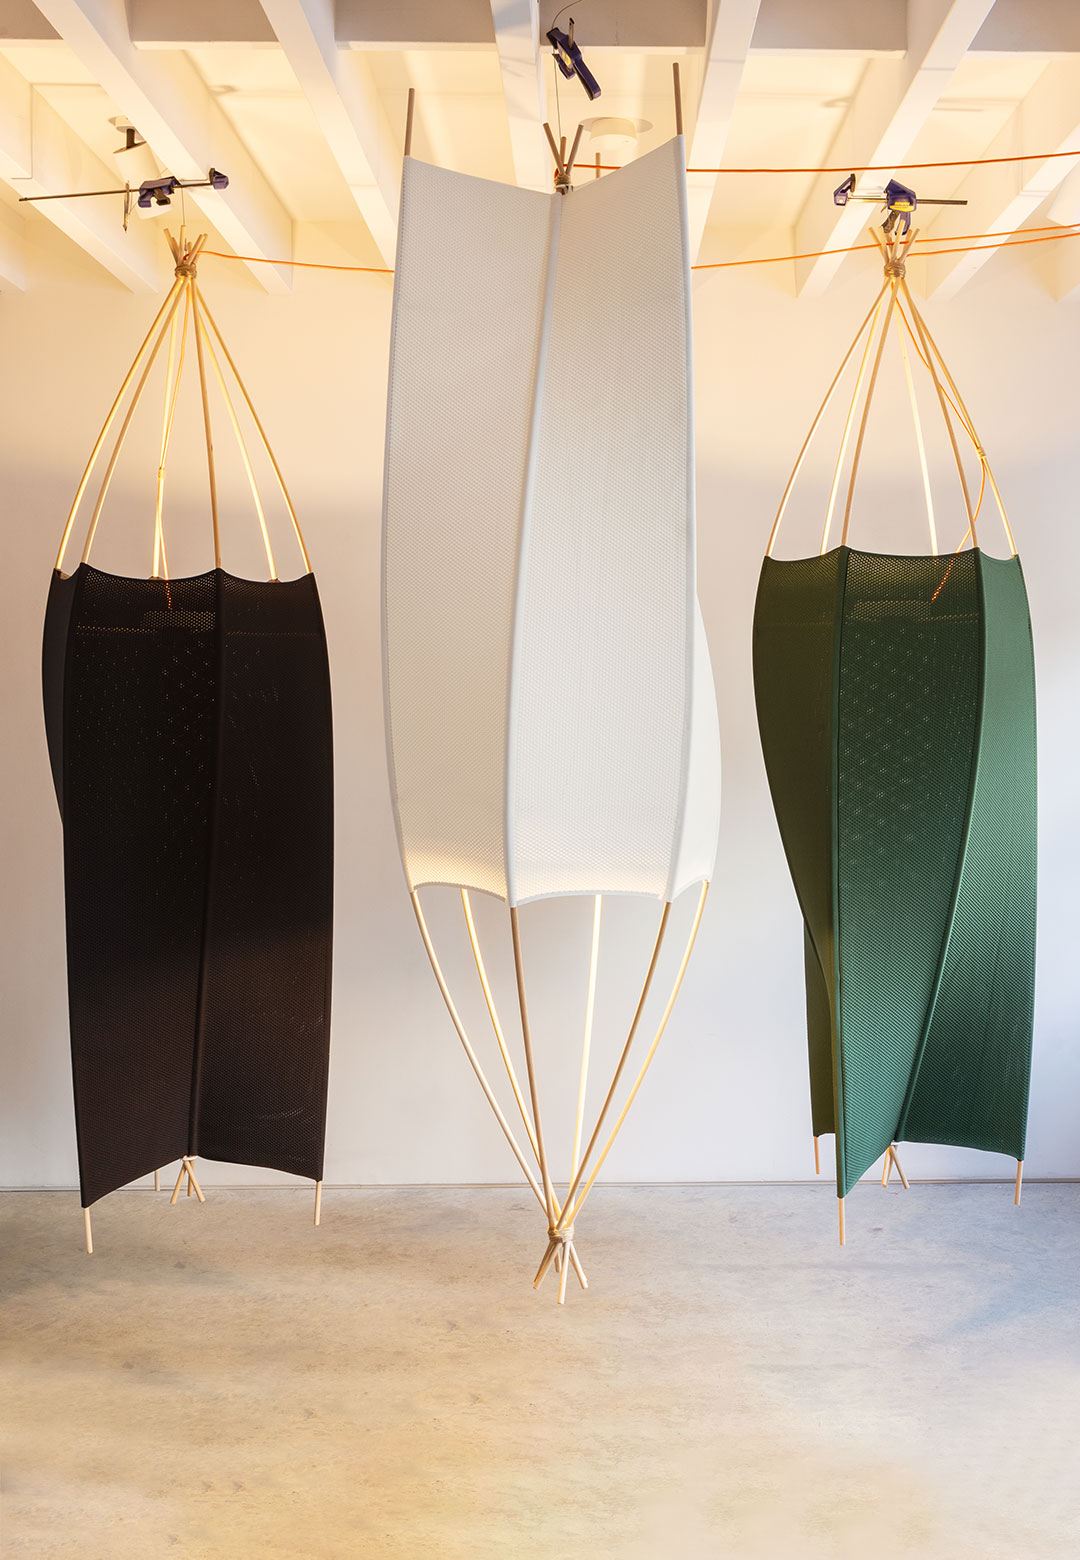 ‘Pupa’ by Pearson Lloyd manifests sculptural play and commercial function in lighting